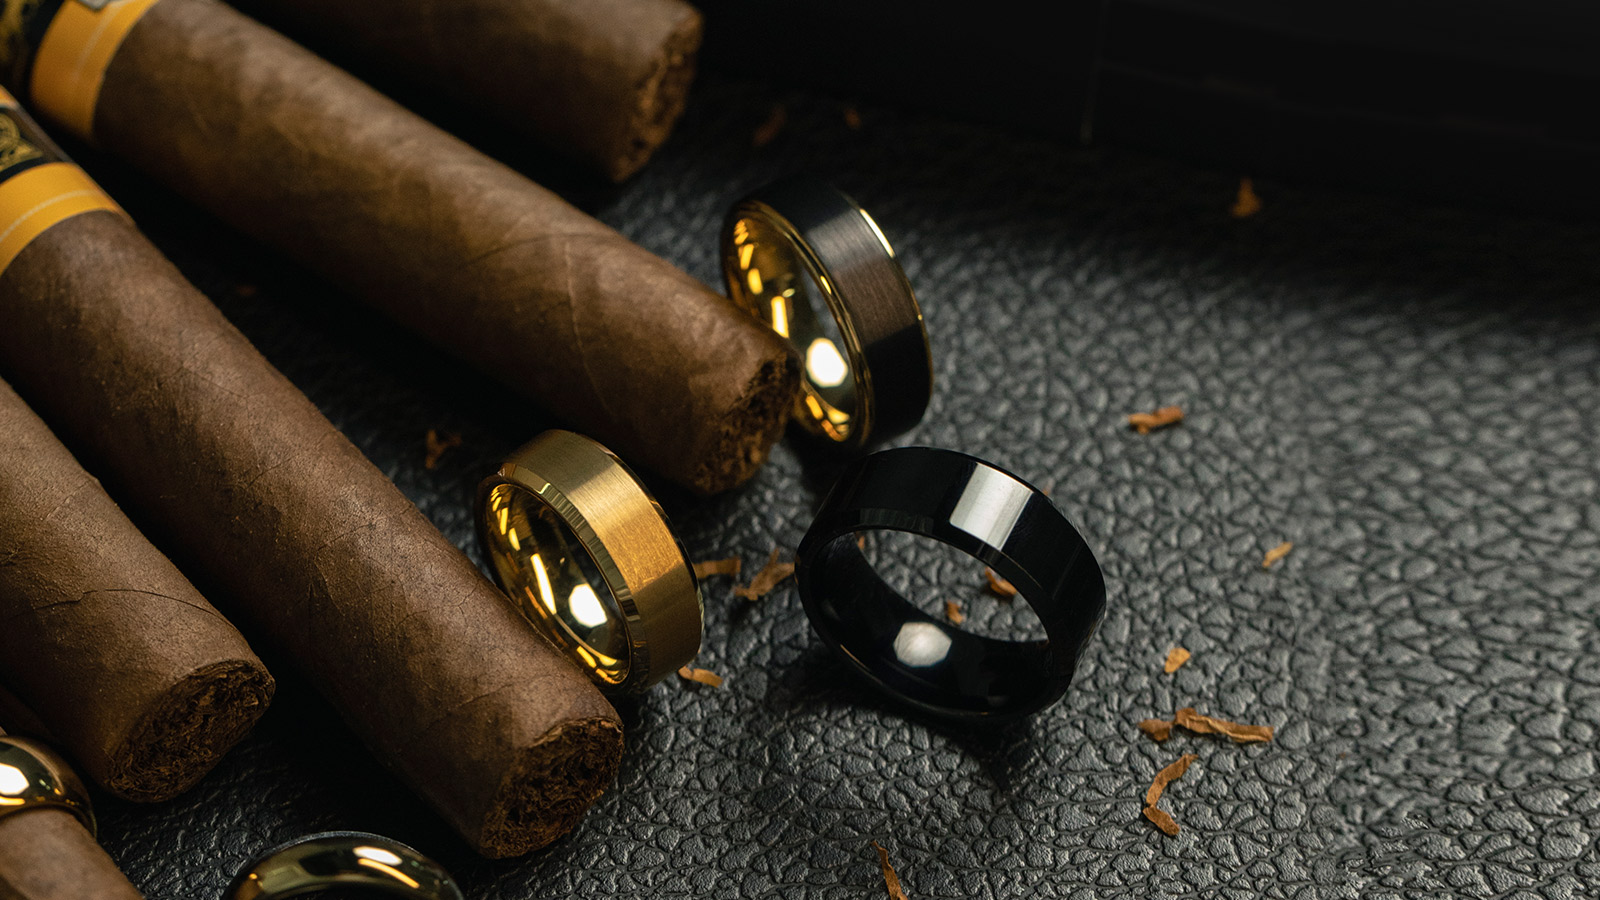 Three tungsten wedding rings were placed on leather, next to cigars